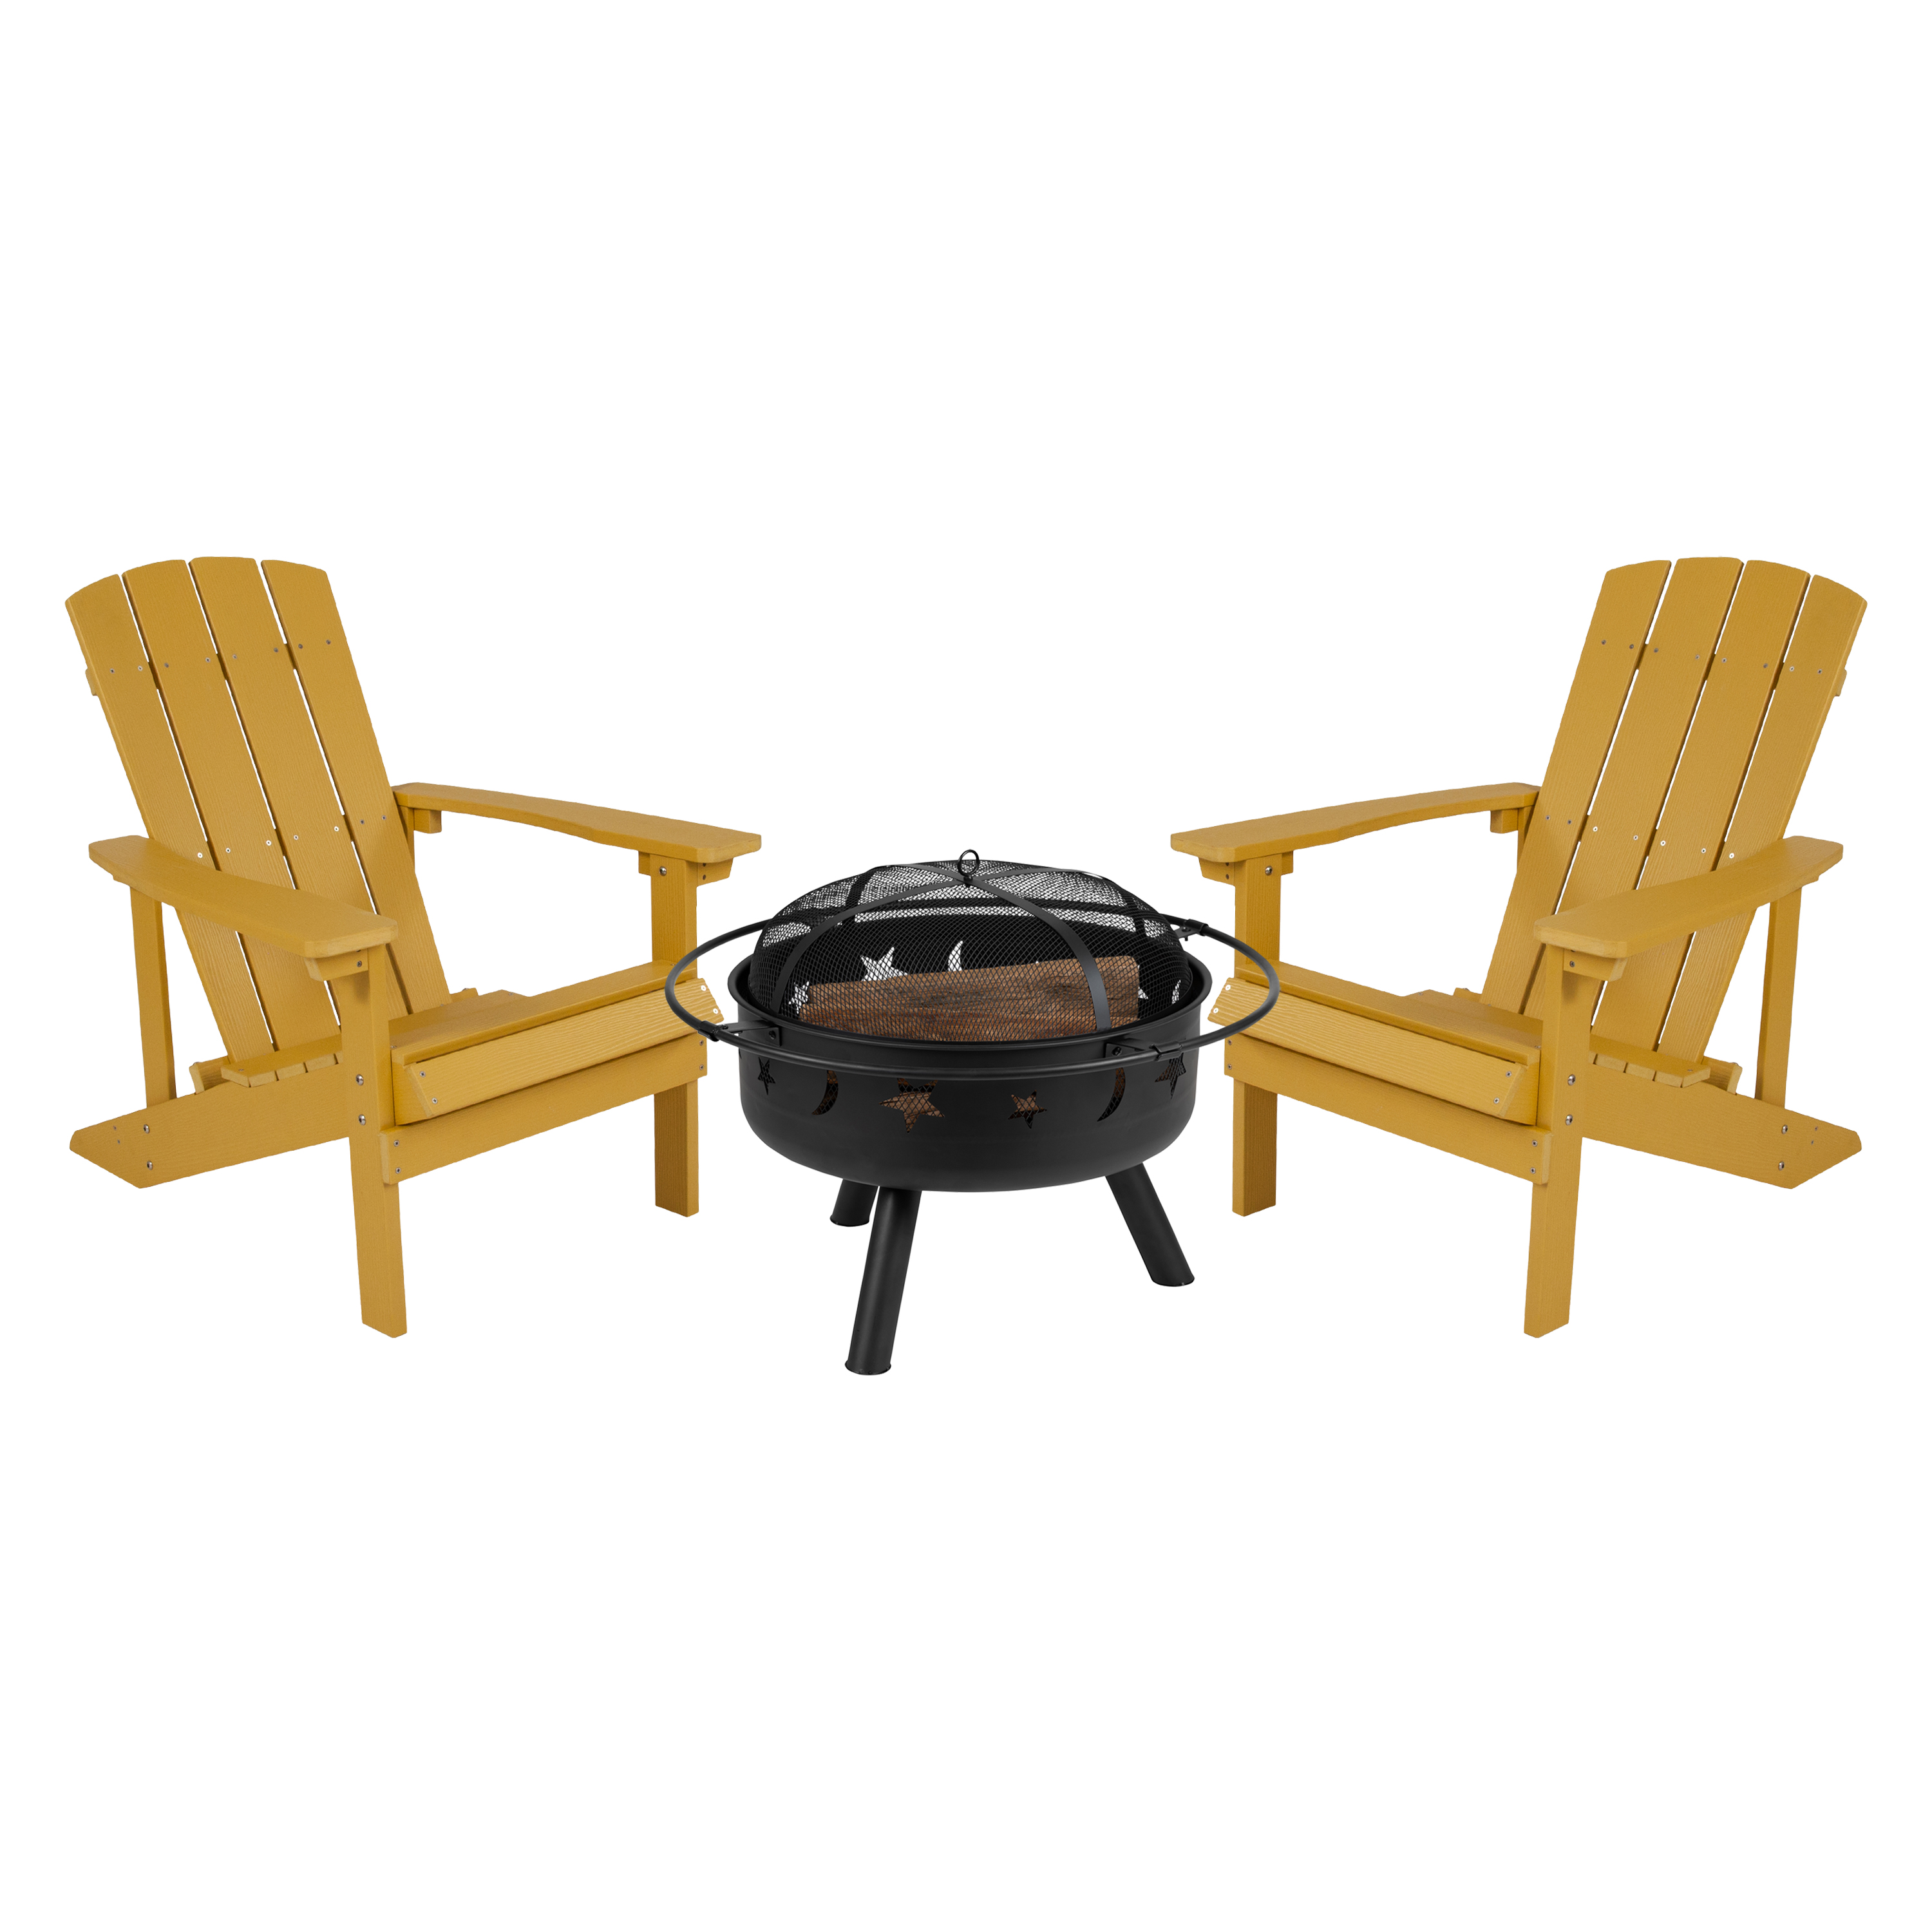 Flash Furniture JJ-C145012-32D-YLW-GG 3 Piece Yellow Poly Resin Wood Adirondack Chair Set with Fire Pit